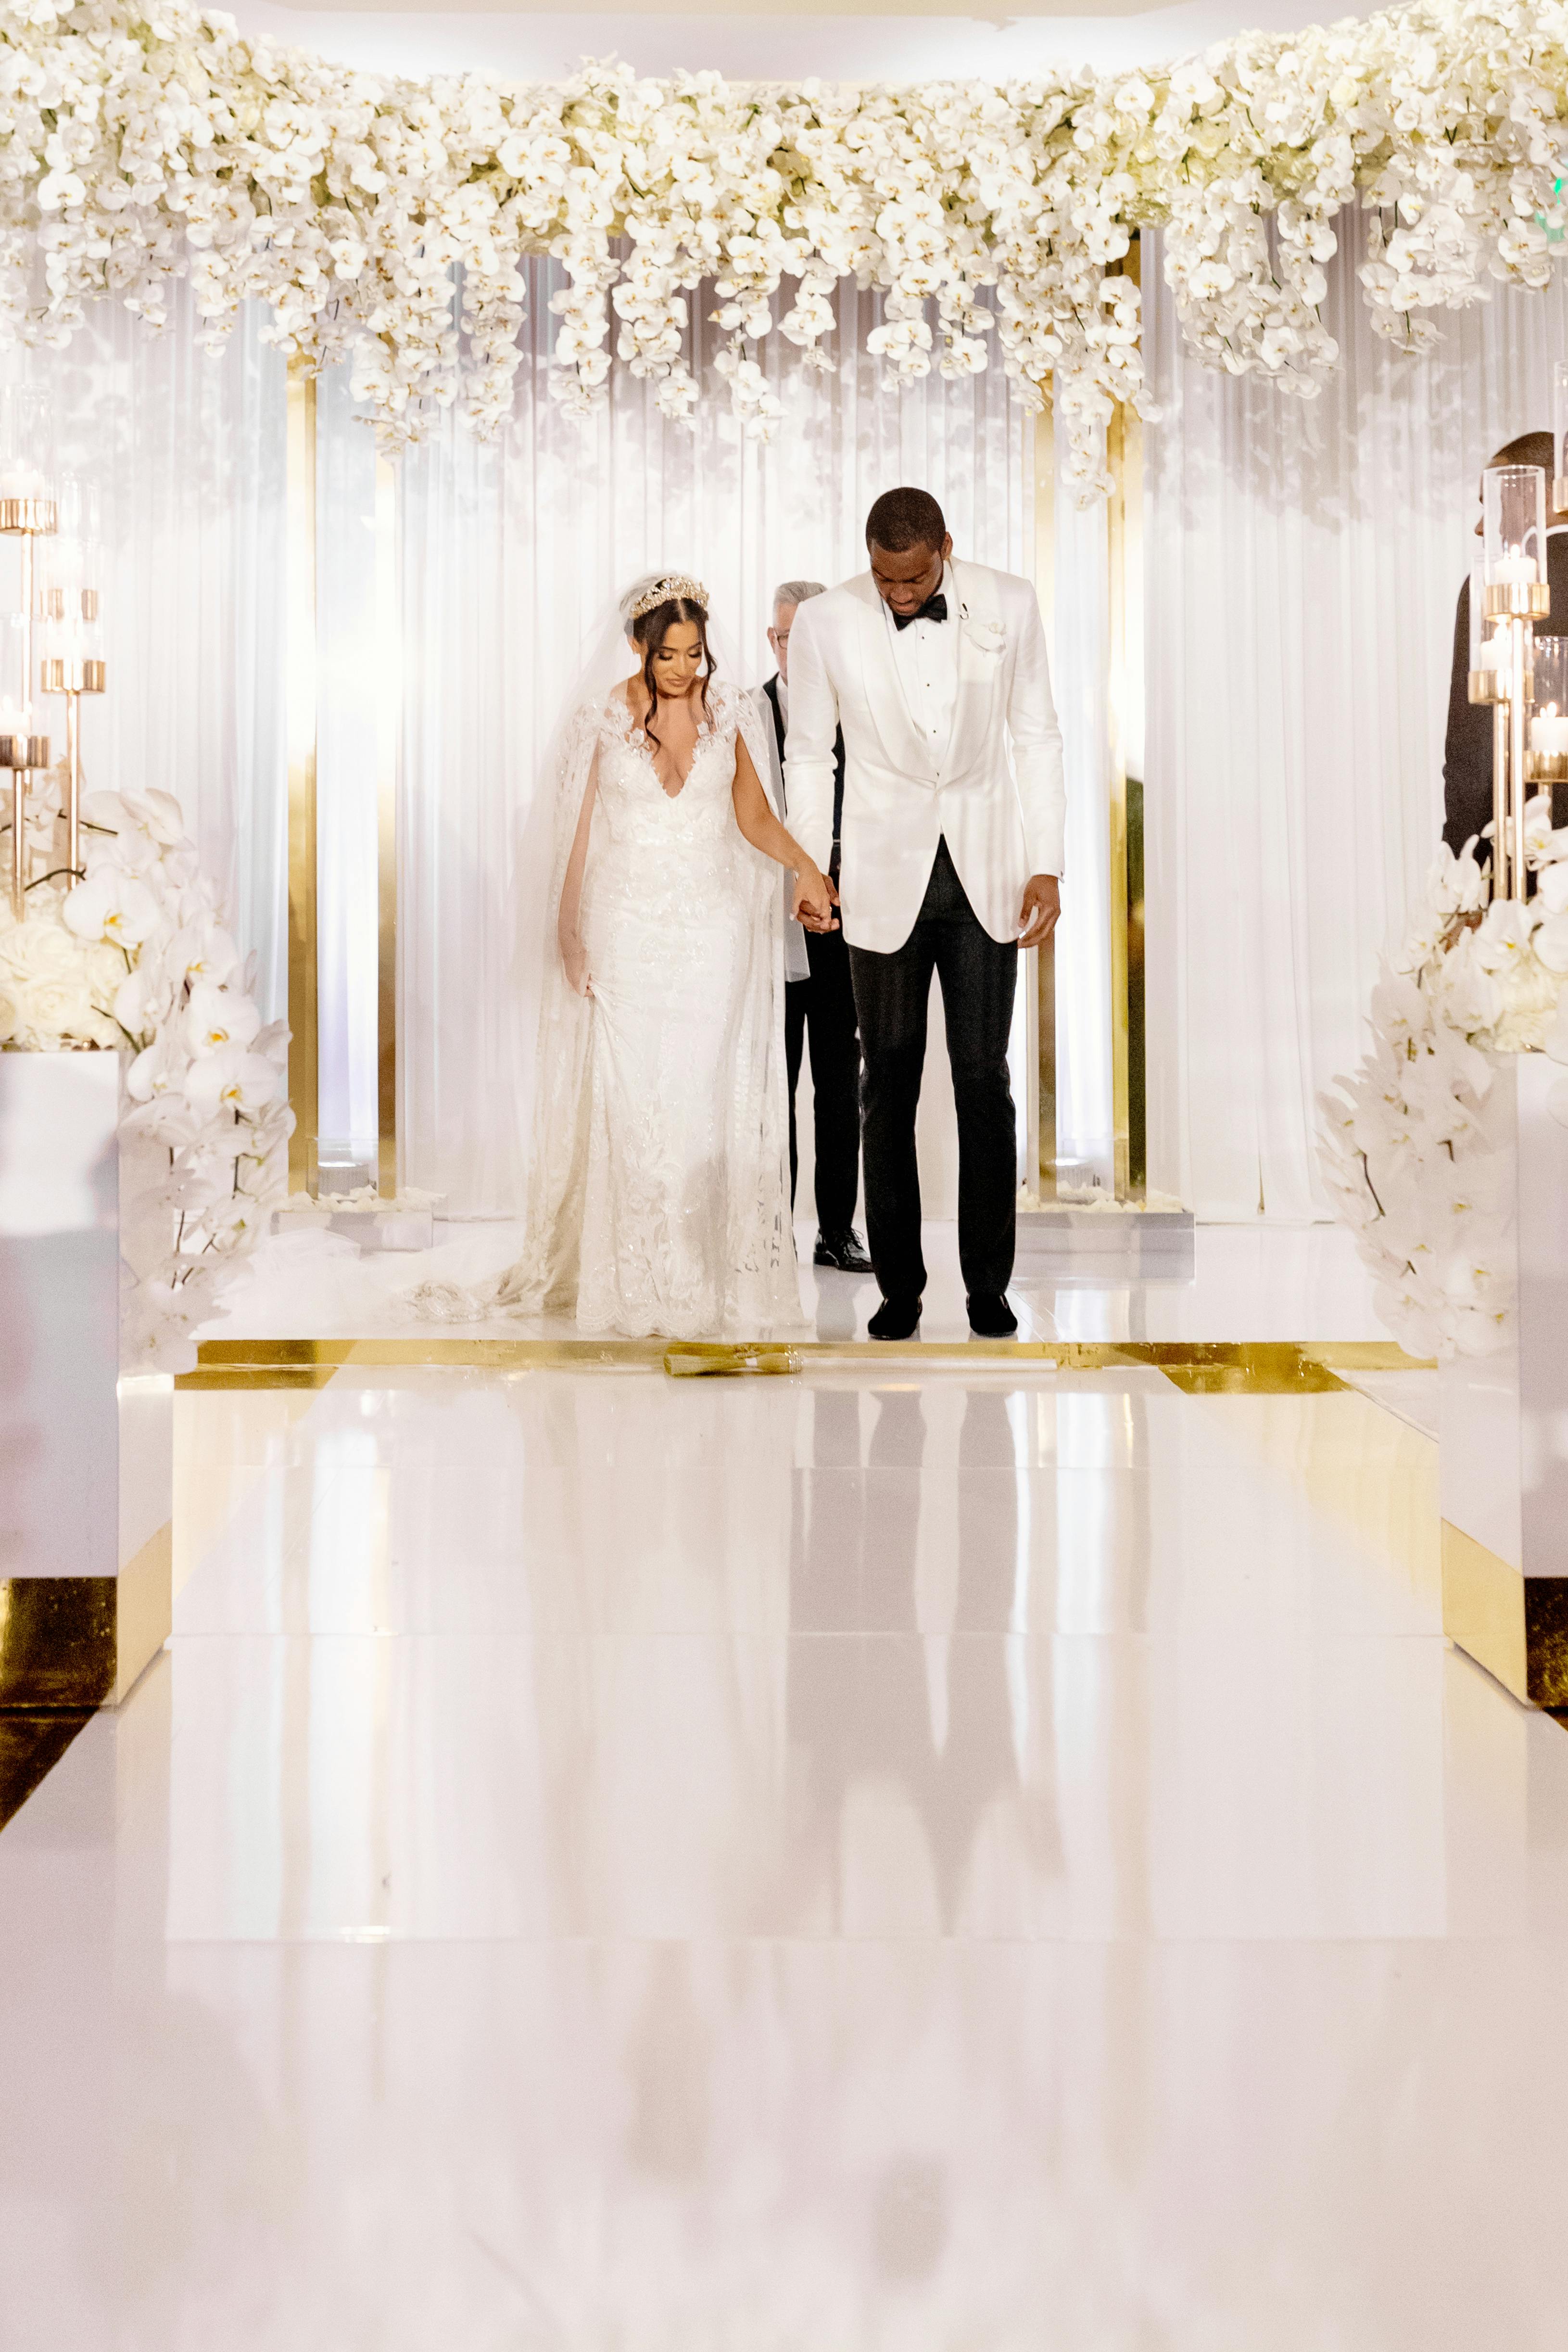 Textured White Layered Wedding at Four Seasons Hotel Miami with Mirrored Wedding Aisle | PartySlate